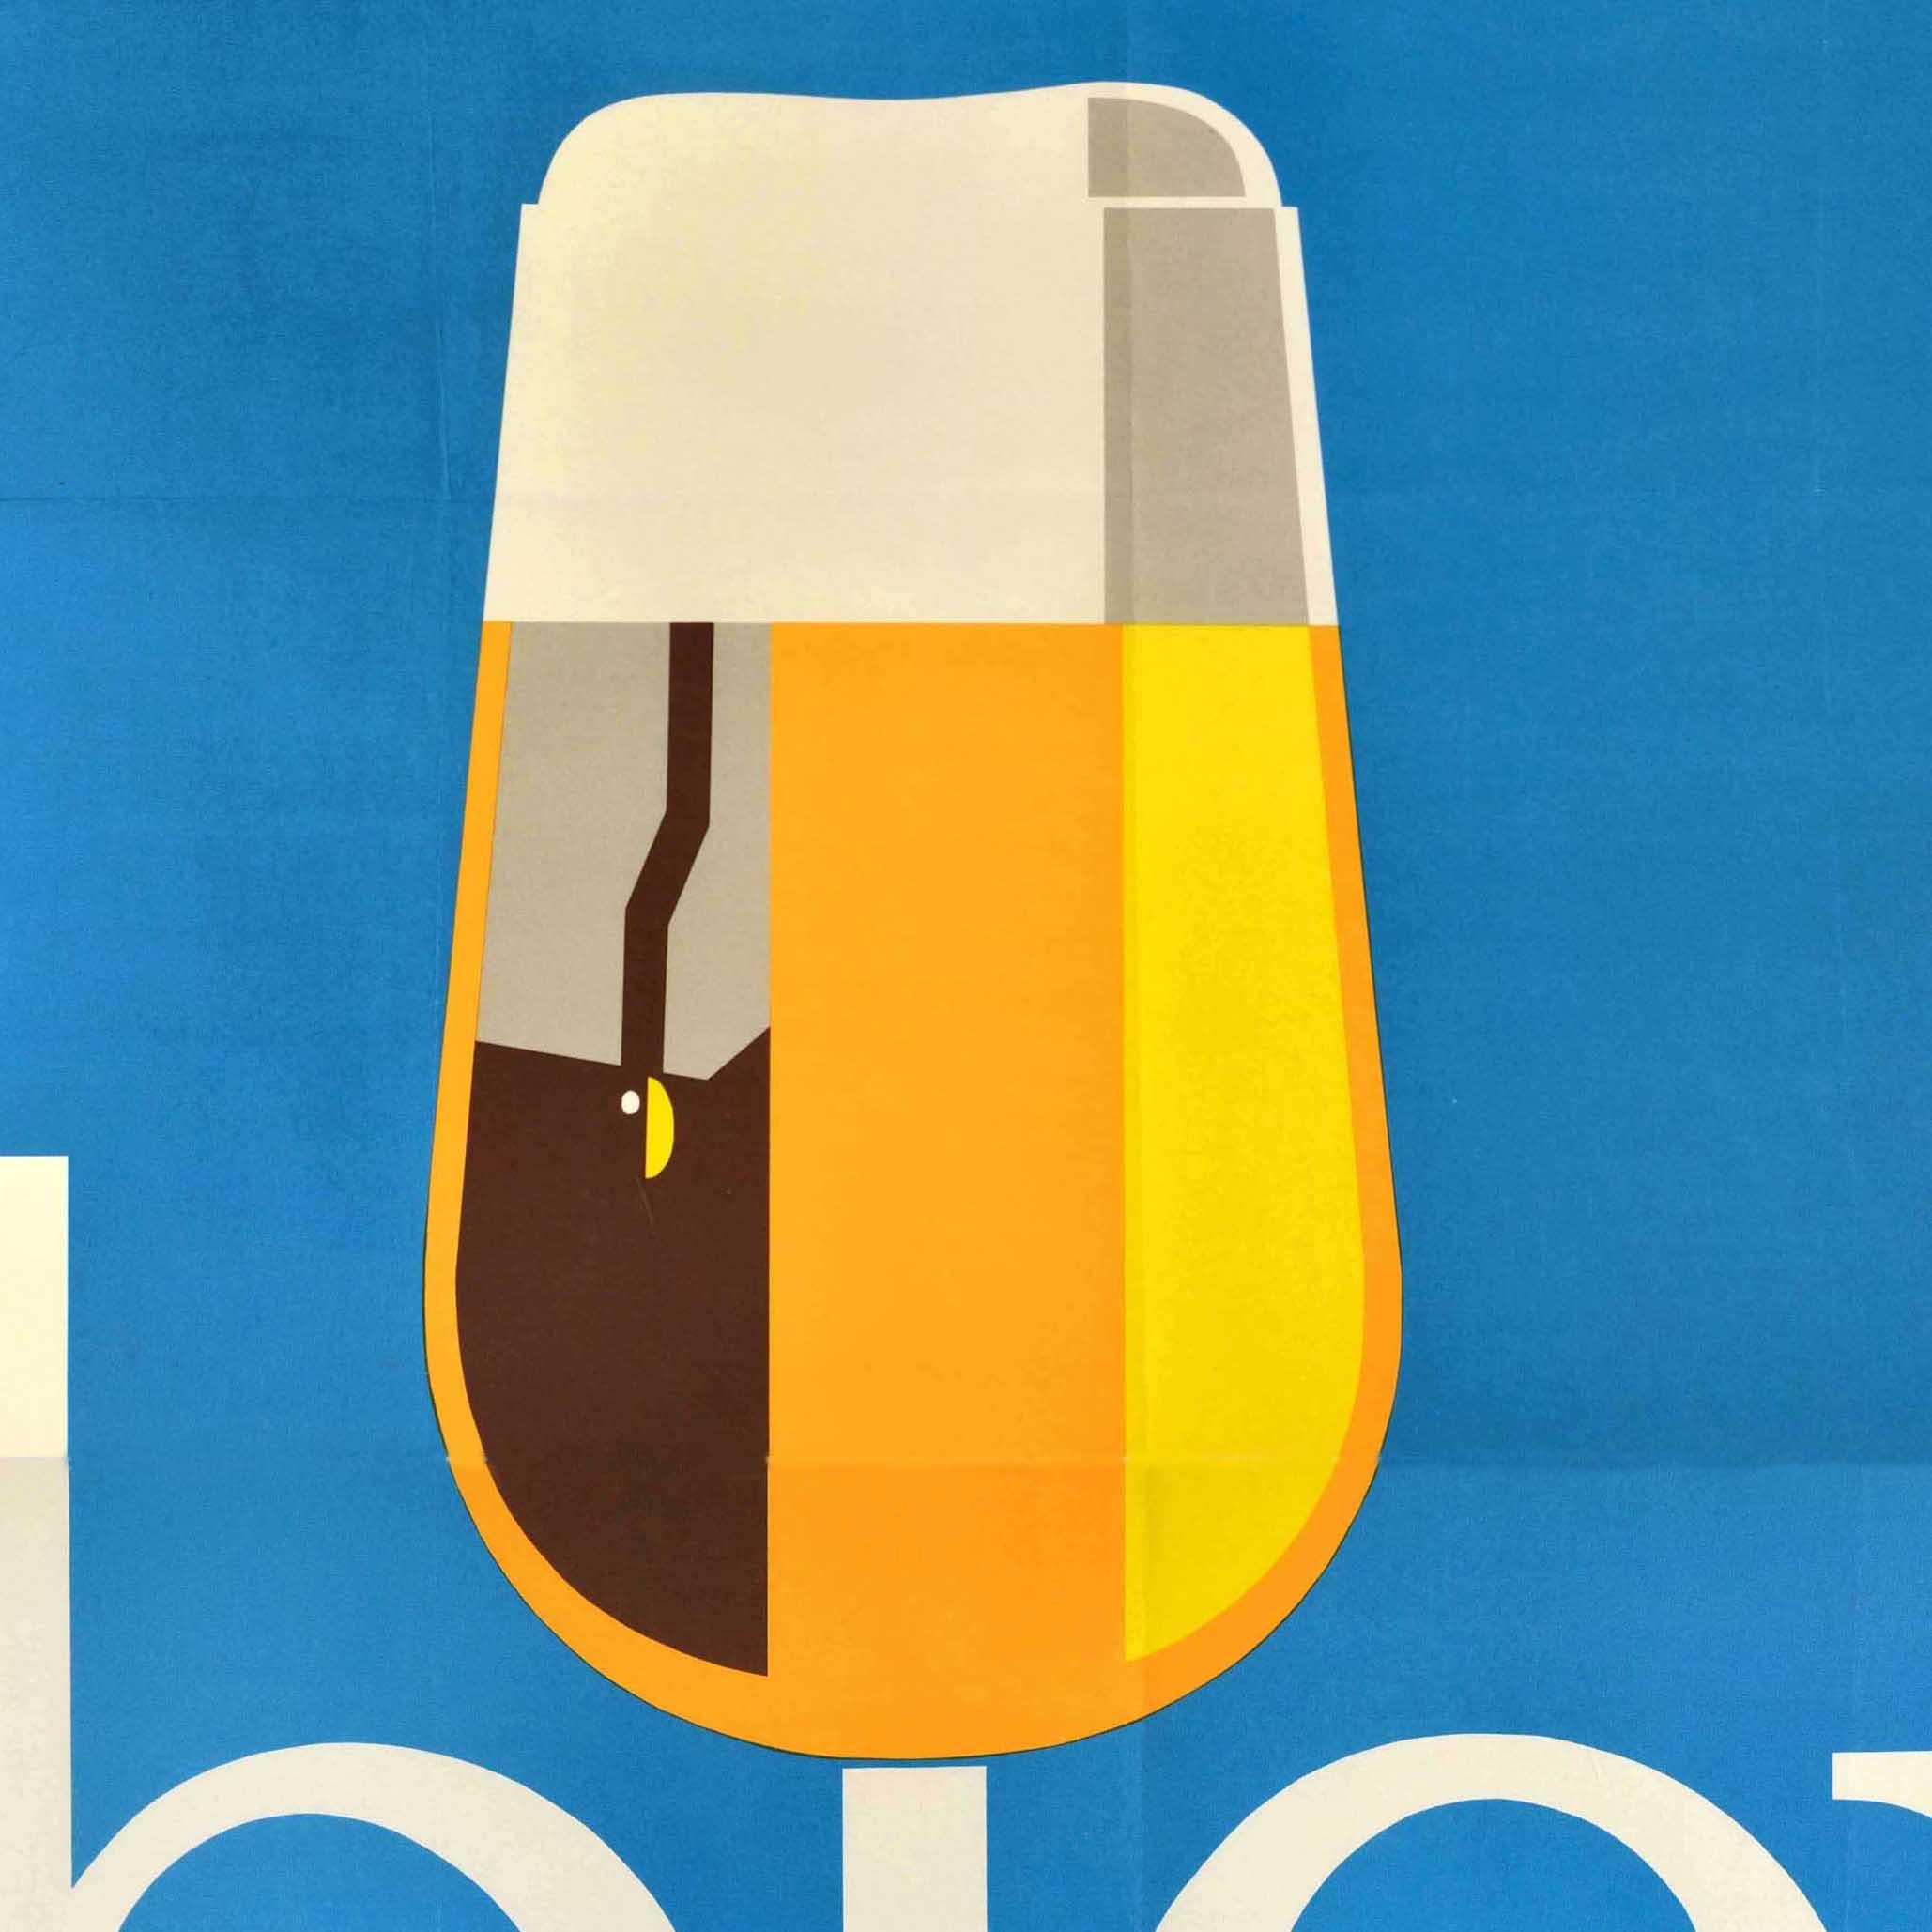 Original Vintage Advertising Poster Drink Beer Moderately Glass Bier Alcohol Art - Print by Unknown